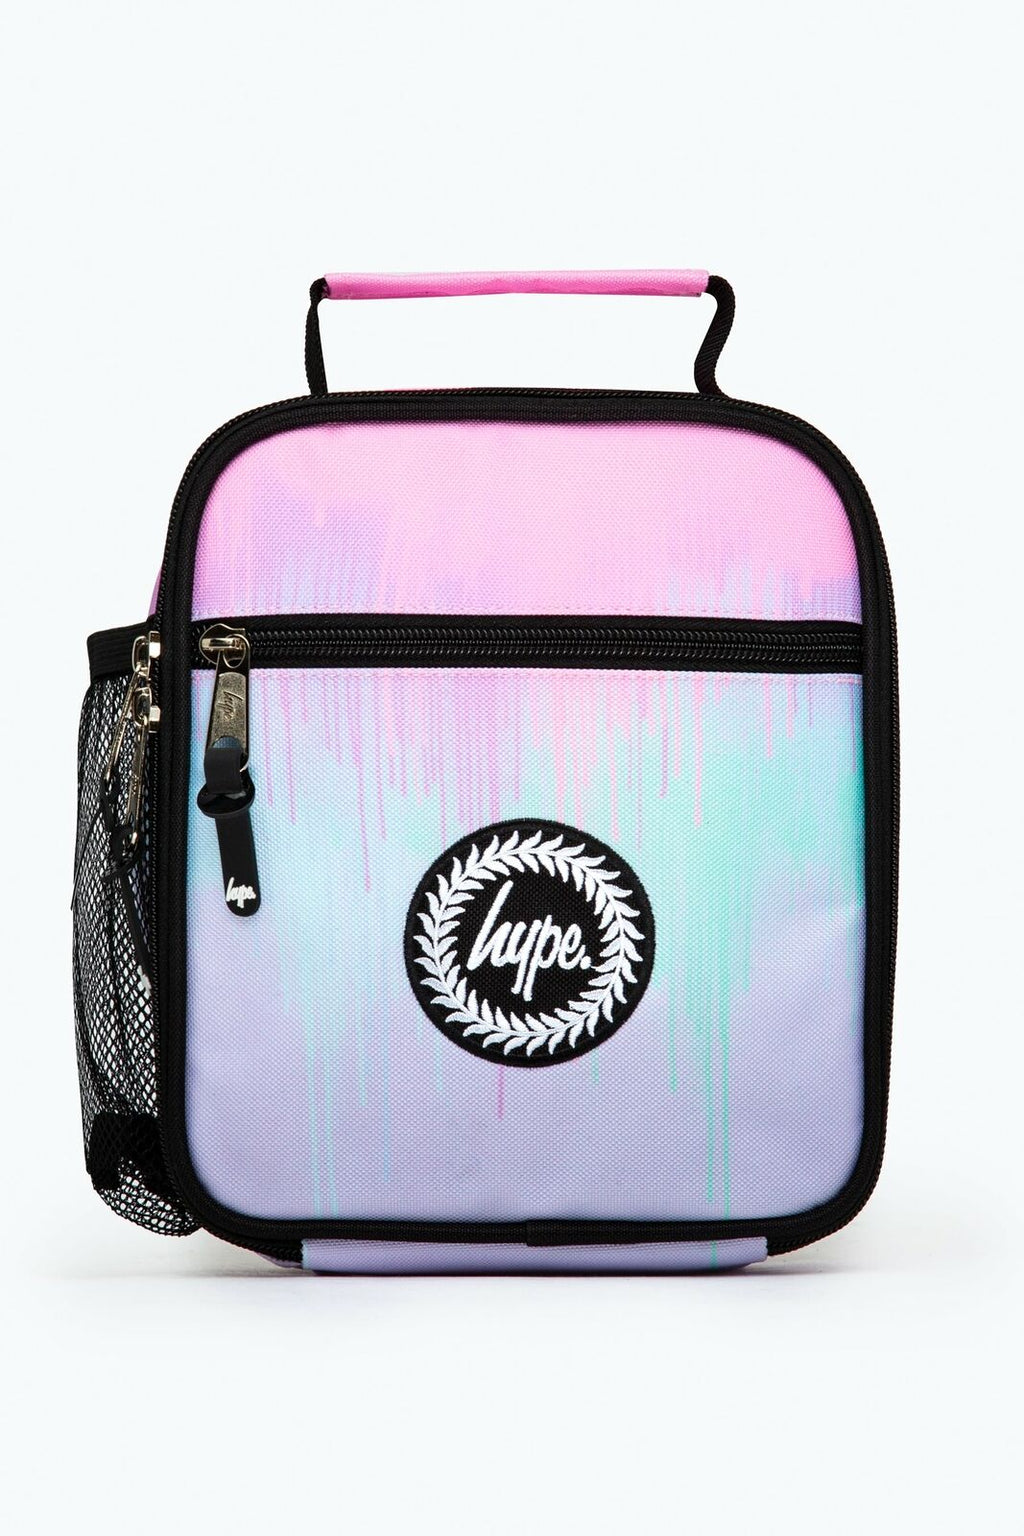 Hype Pastel Drip Lunch Box